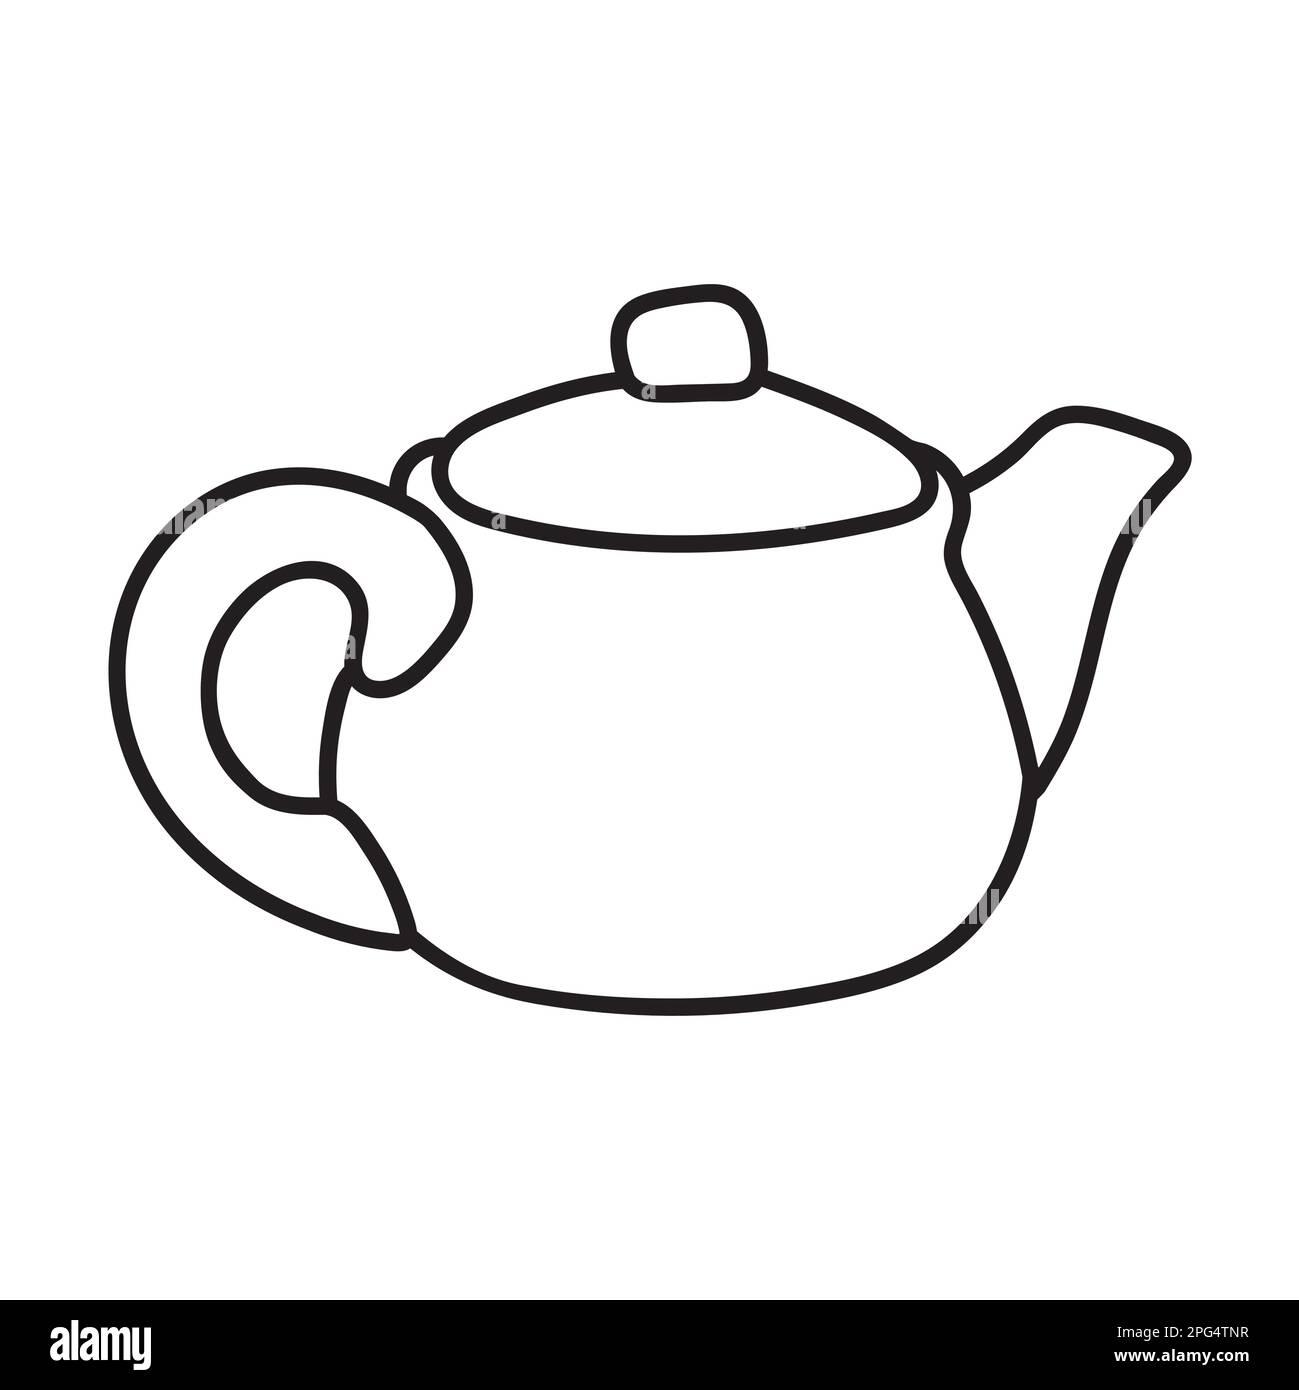 BLACK LINE FREEHAND DRAWN CERAMIC TEAPOT, KETTLE ISOLATED Stock Vector